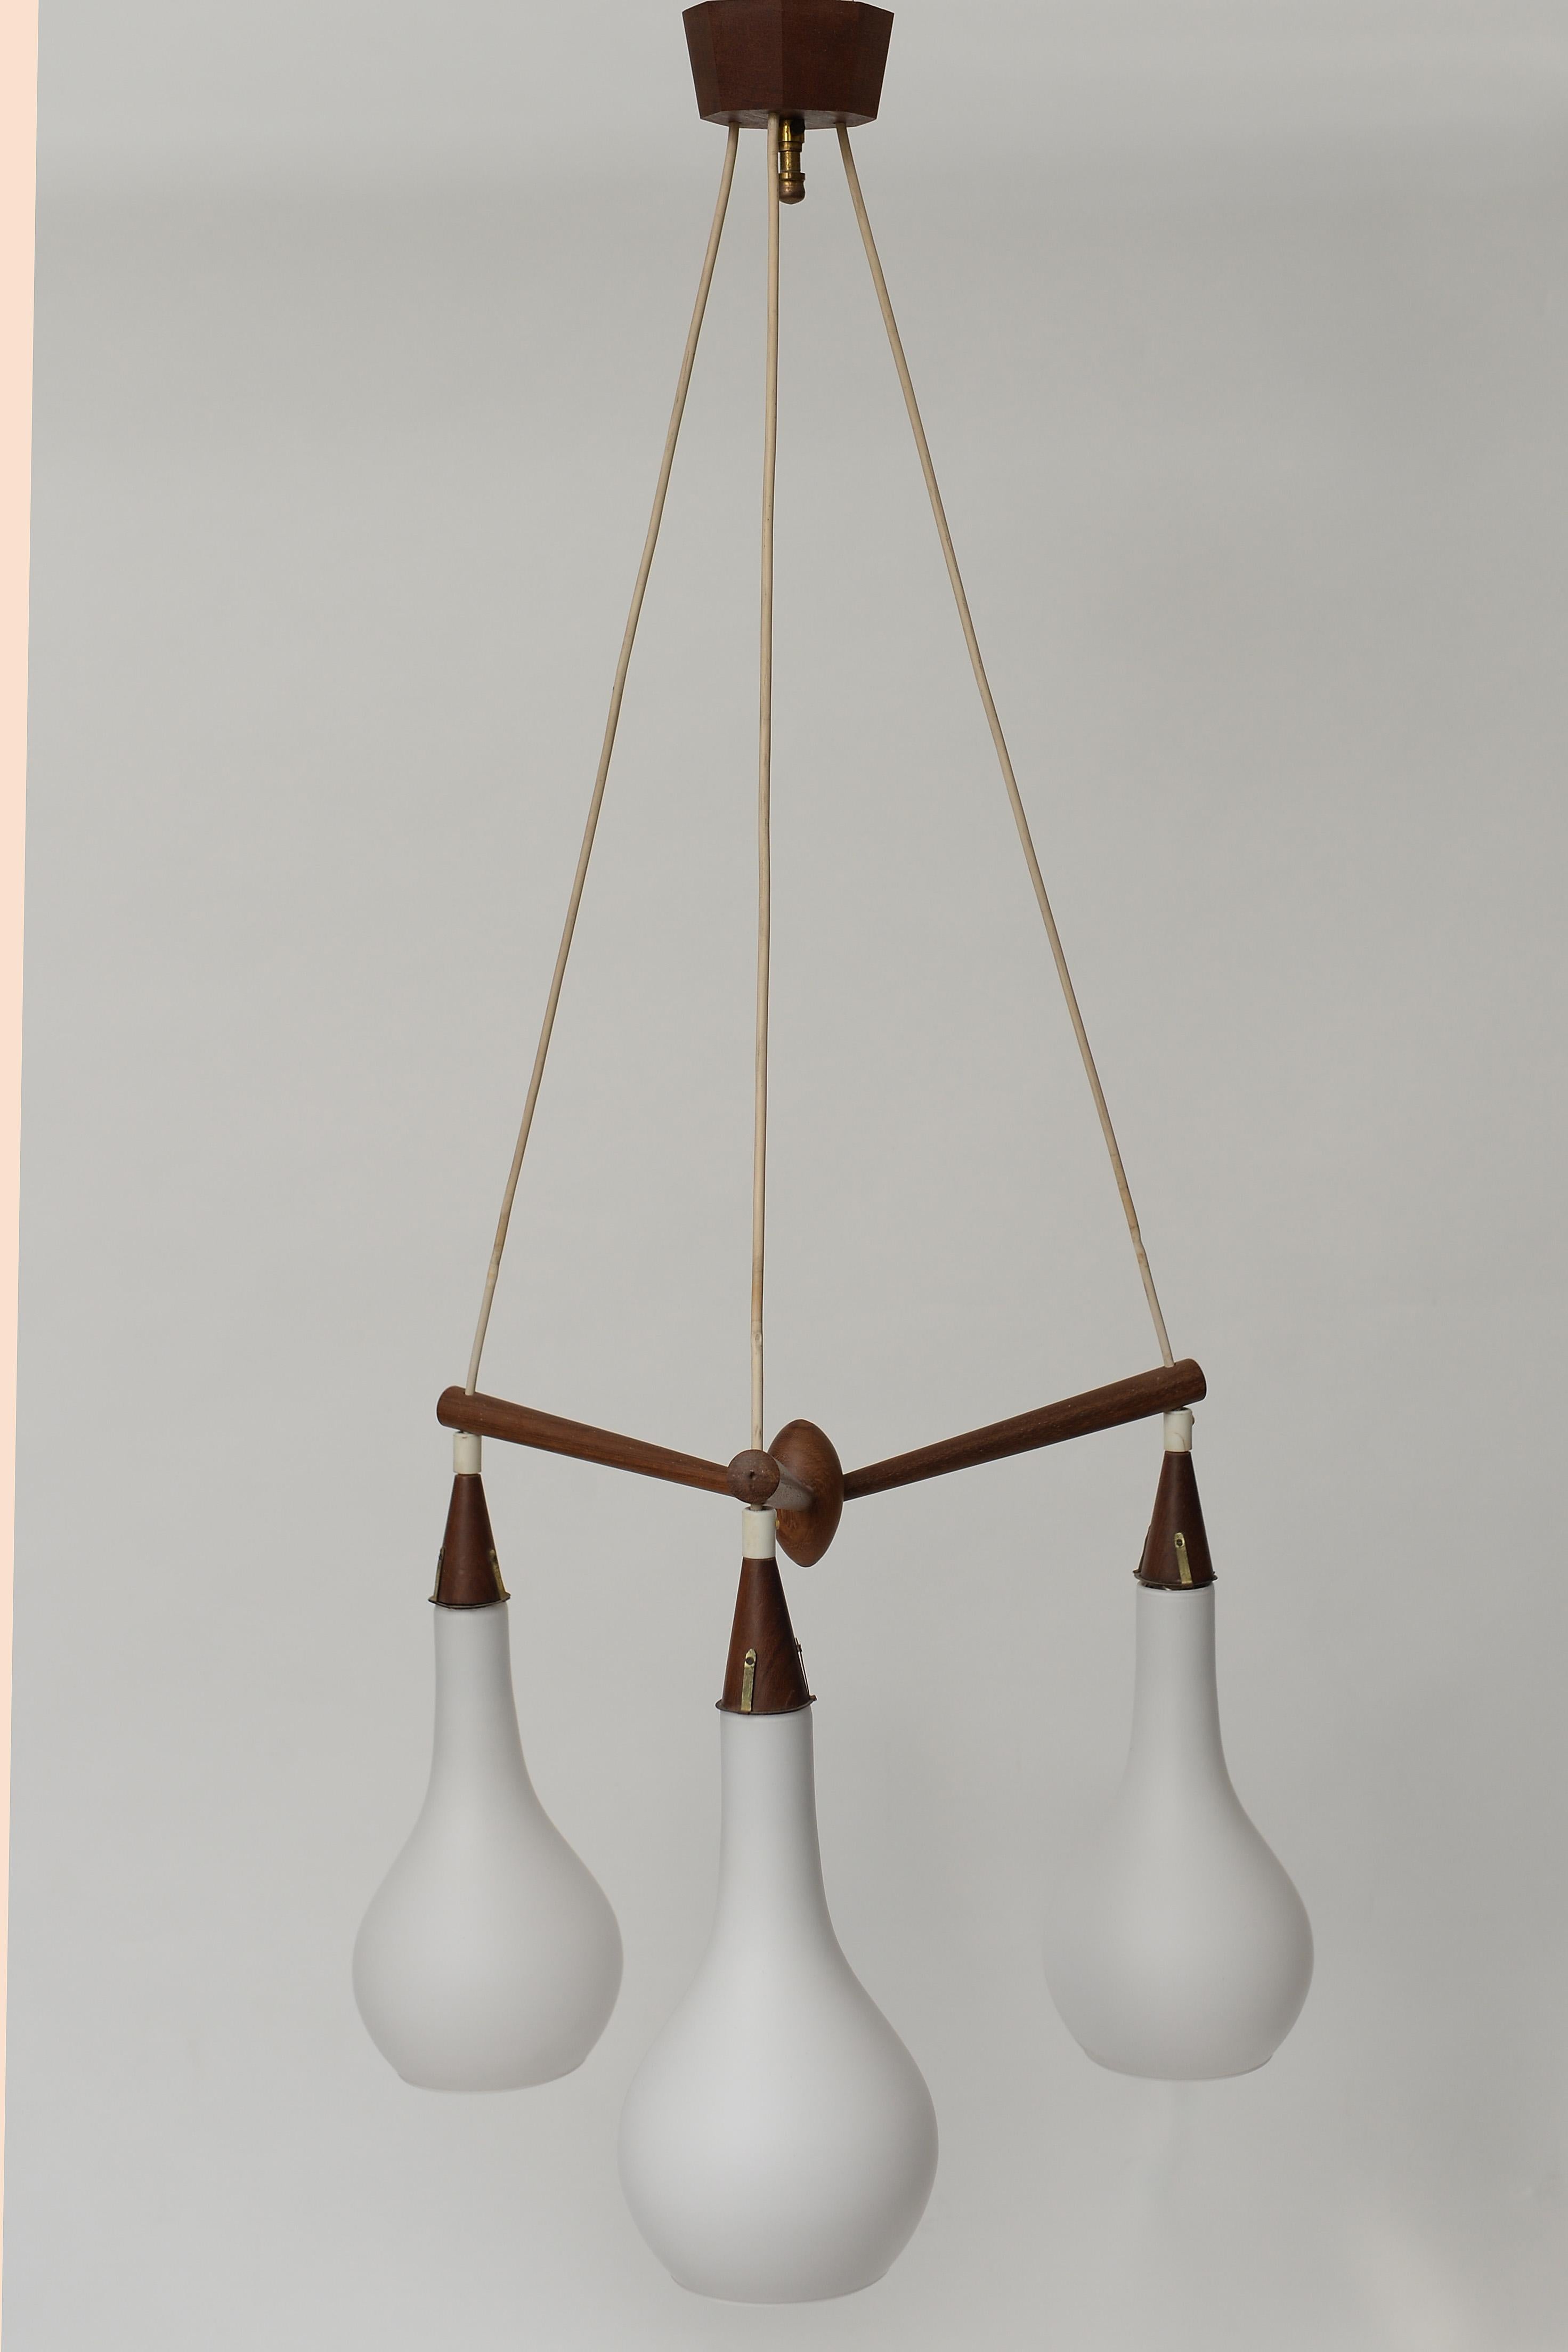 Midcentury Scandinavian chandelier made of teak with teardrop shaped milk glass shades.

The teak chandelier is in perfect condition and has the original teak ceiling canopy.

It creates a warm and charming atmosphere.

Tested and ready for